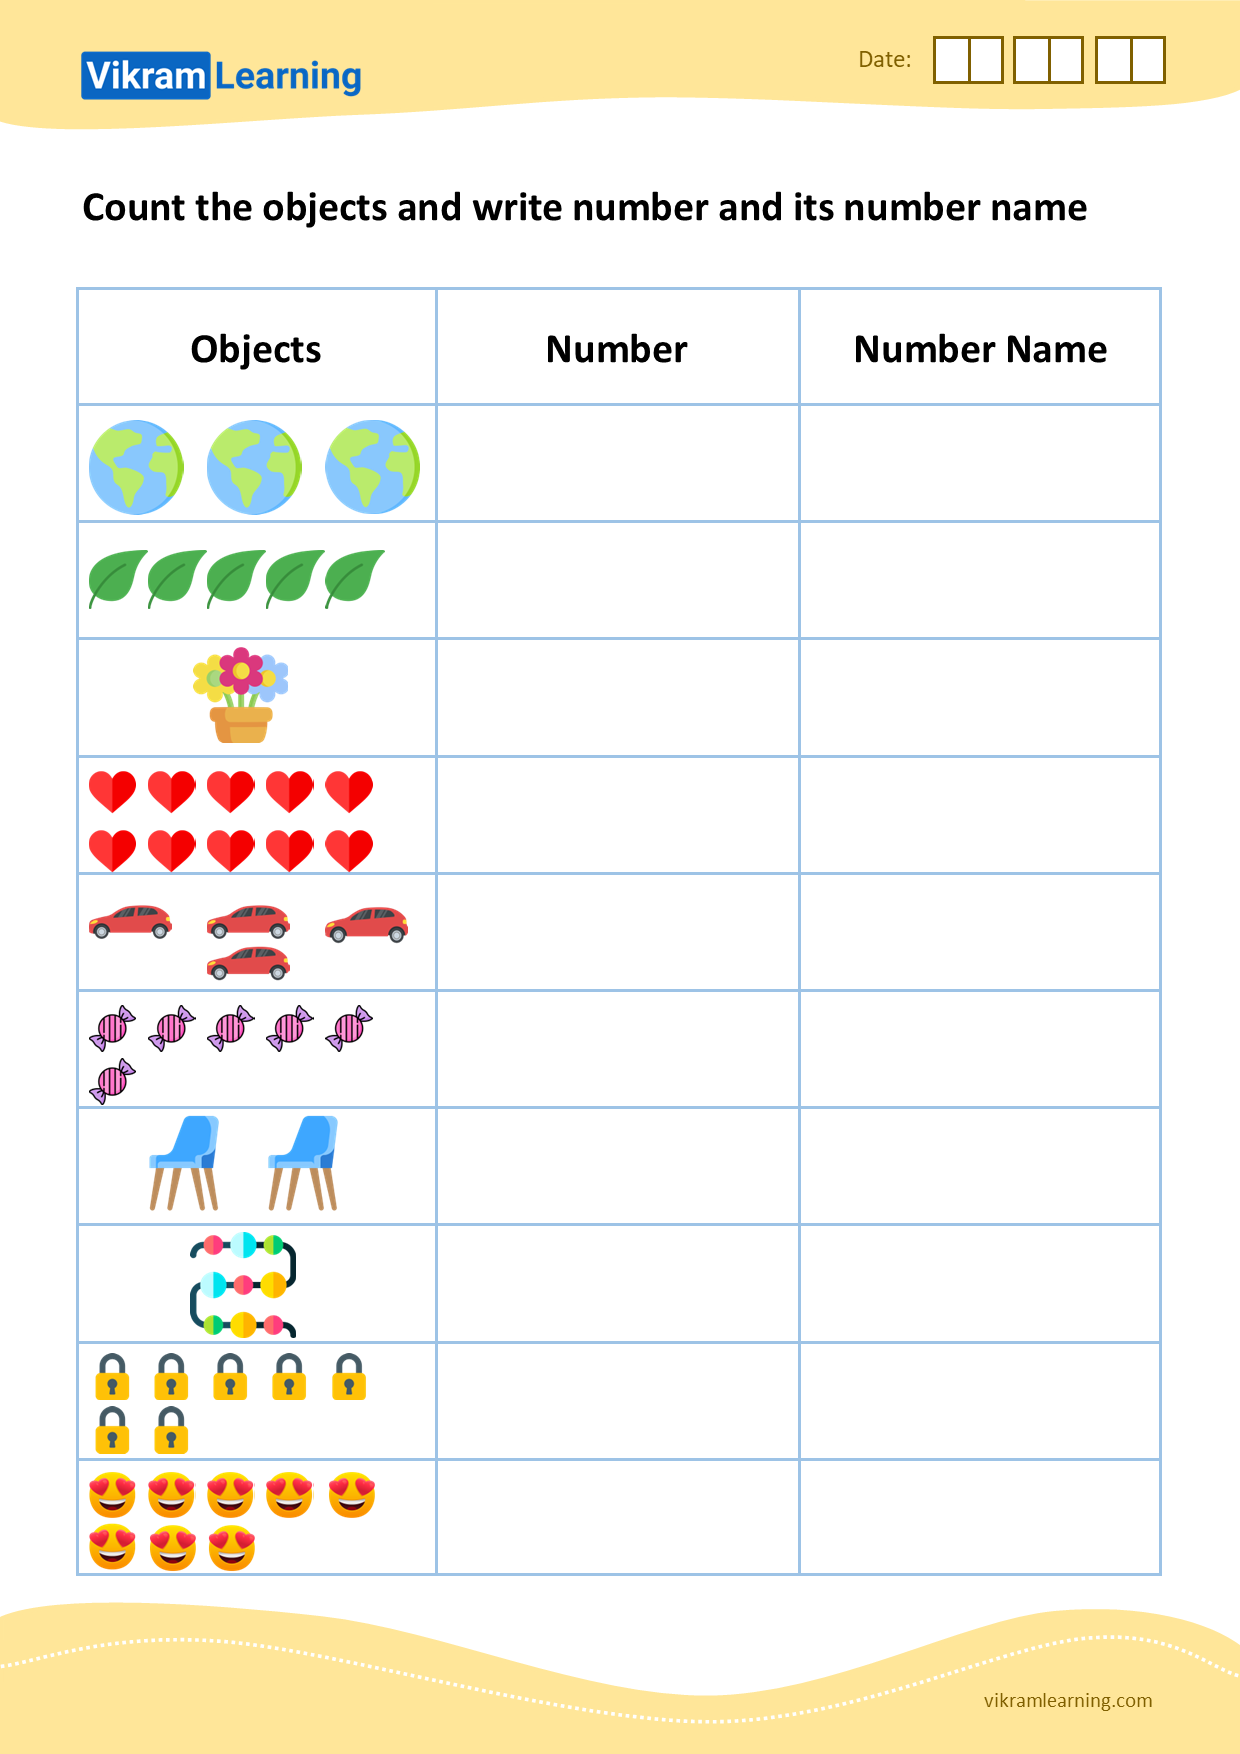 Number Names Worksheet For Class 5